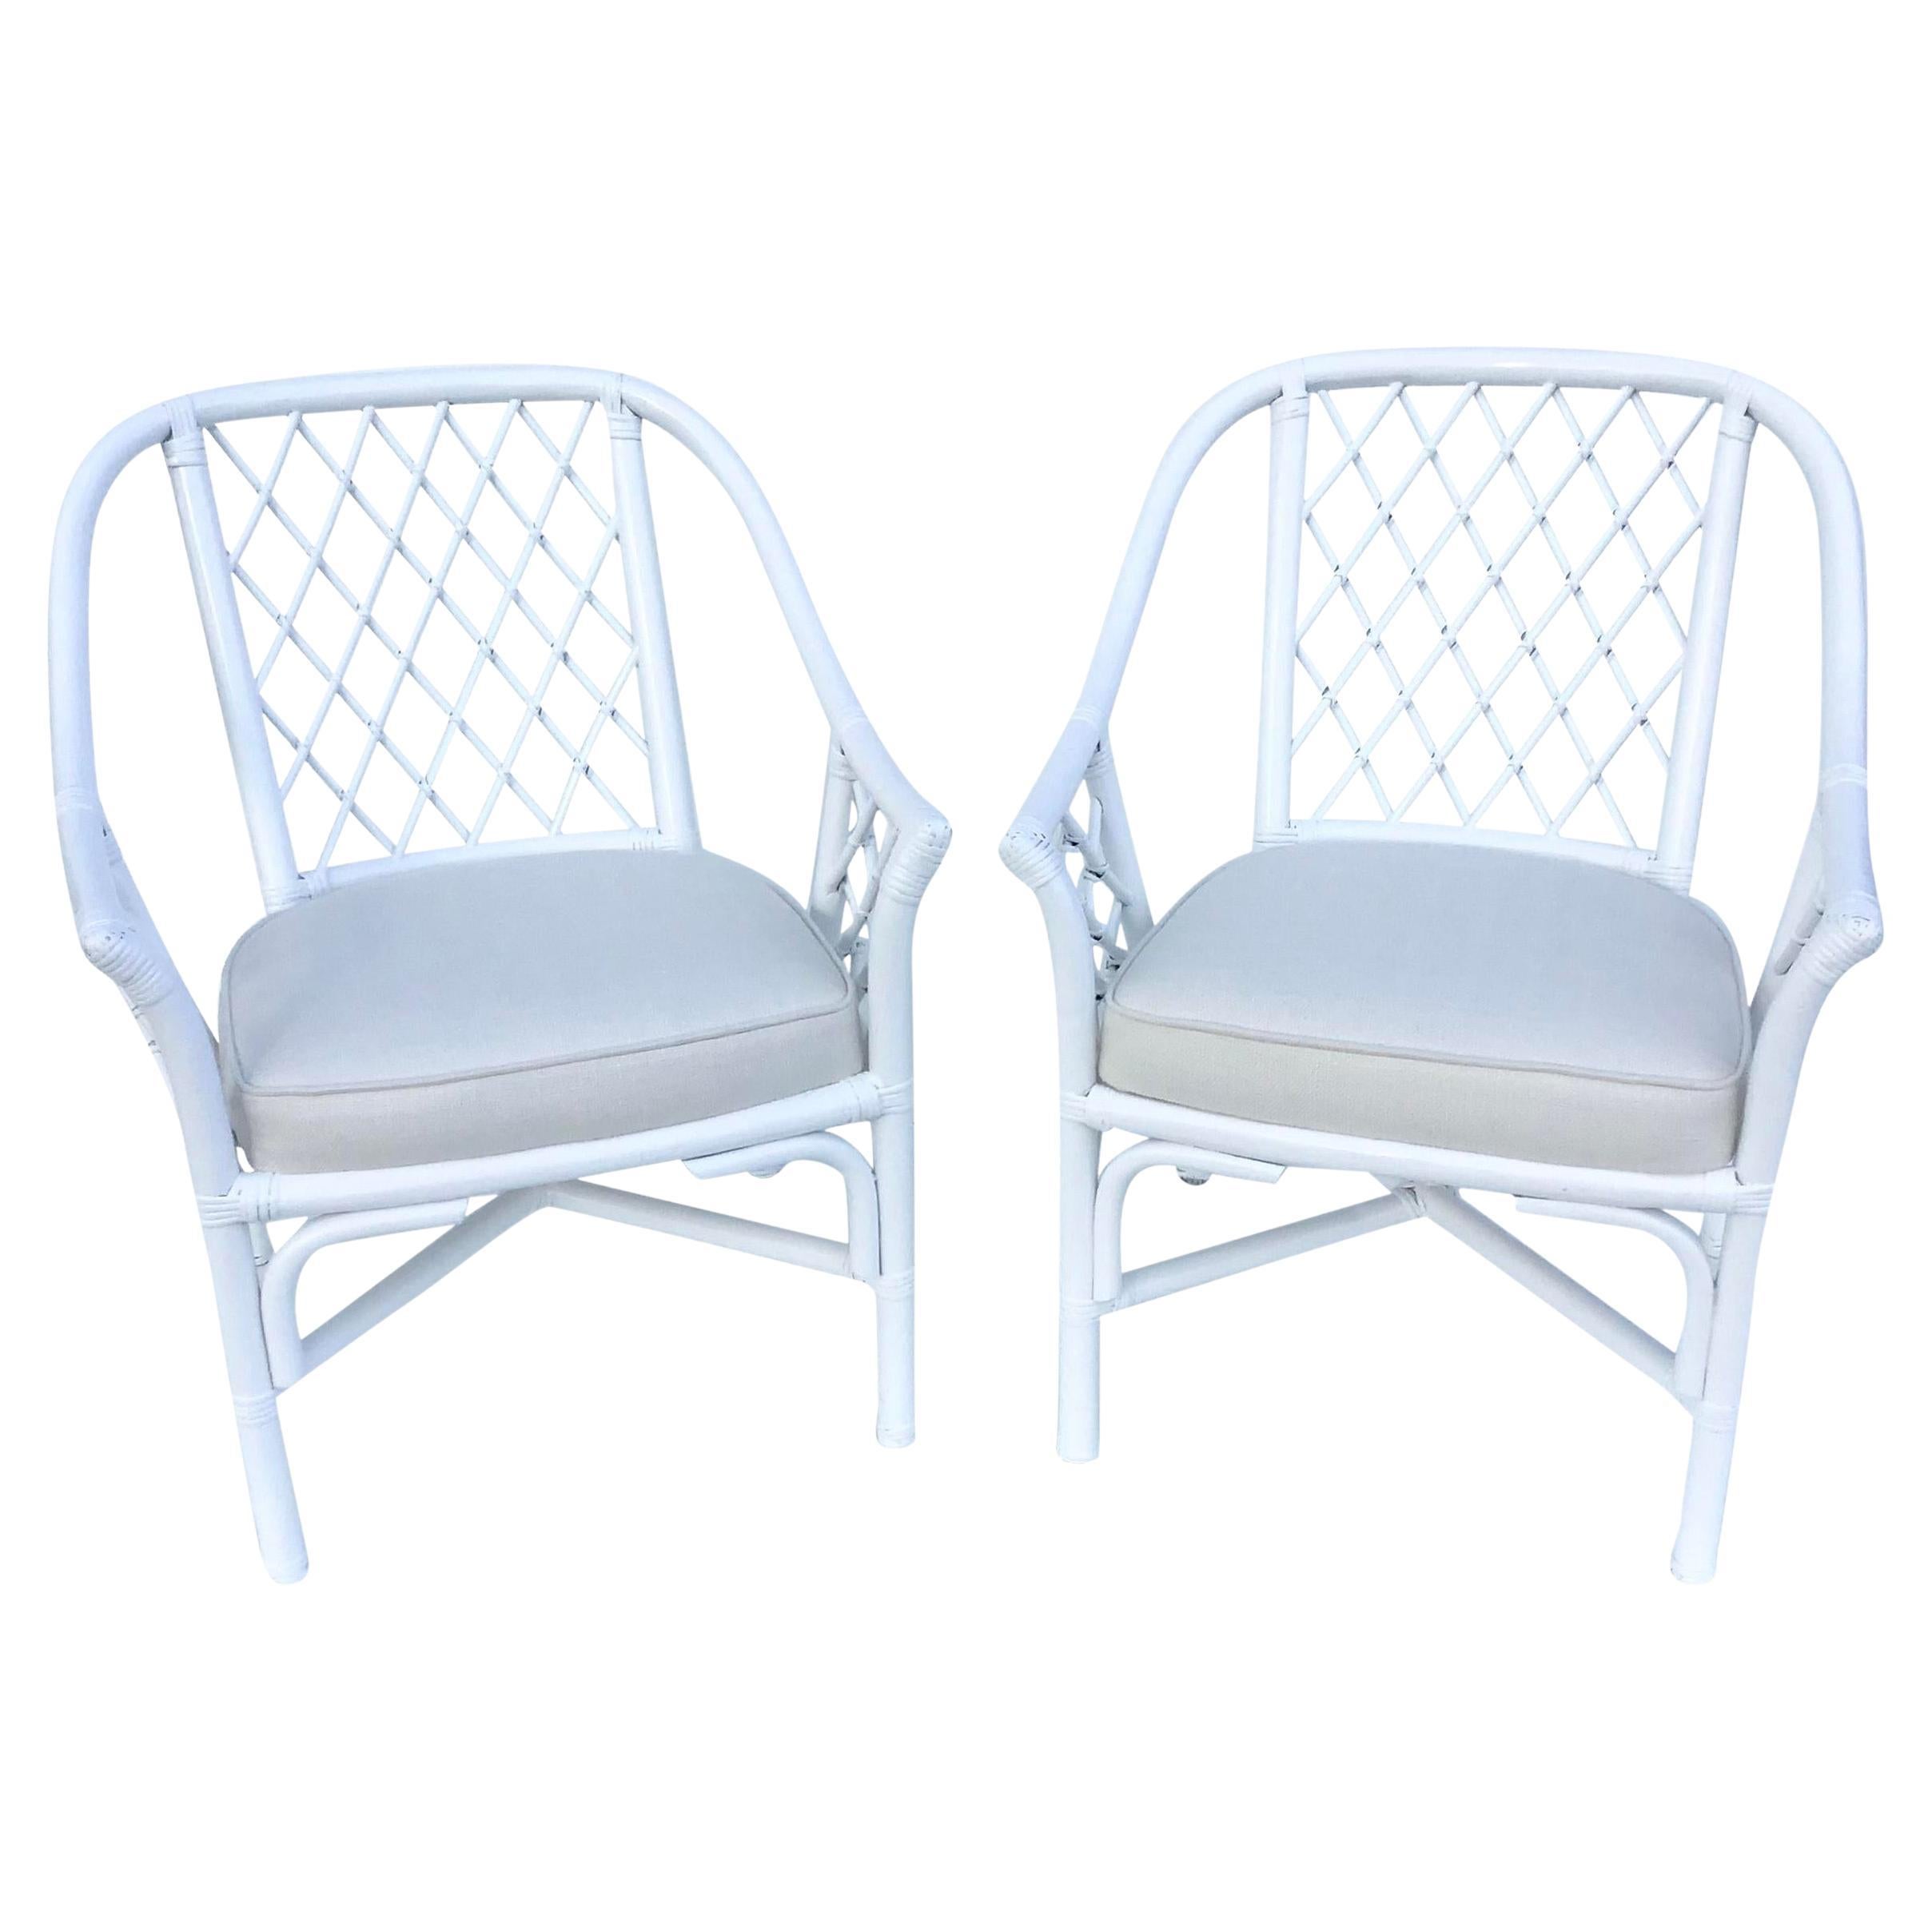 Ficks Reed Barrel Chairs in White Lacquer and Todd Hase Textiles, a Pair For Sale